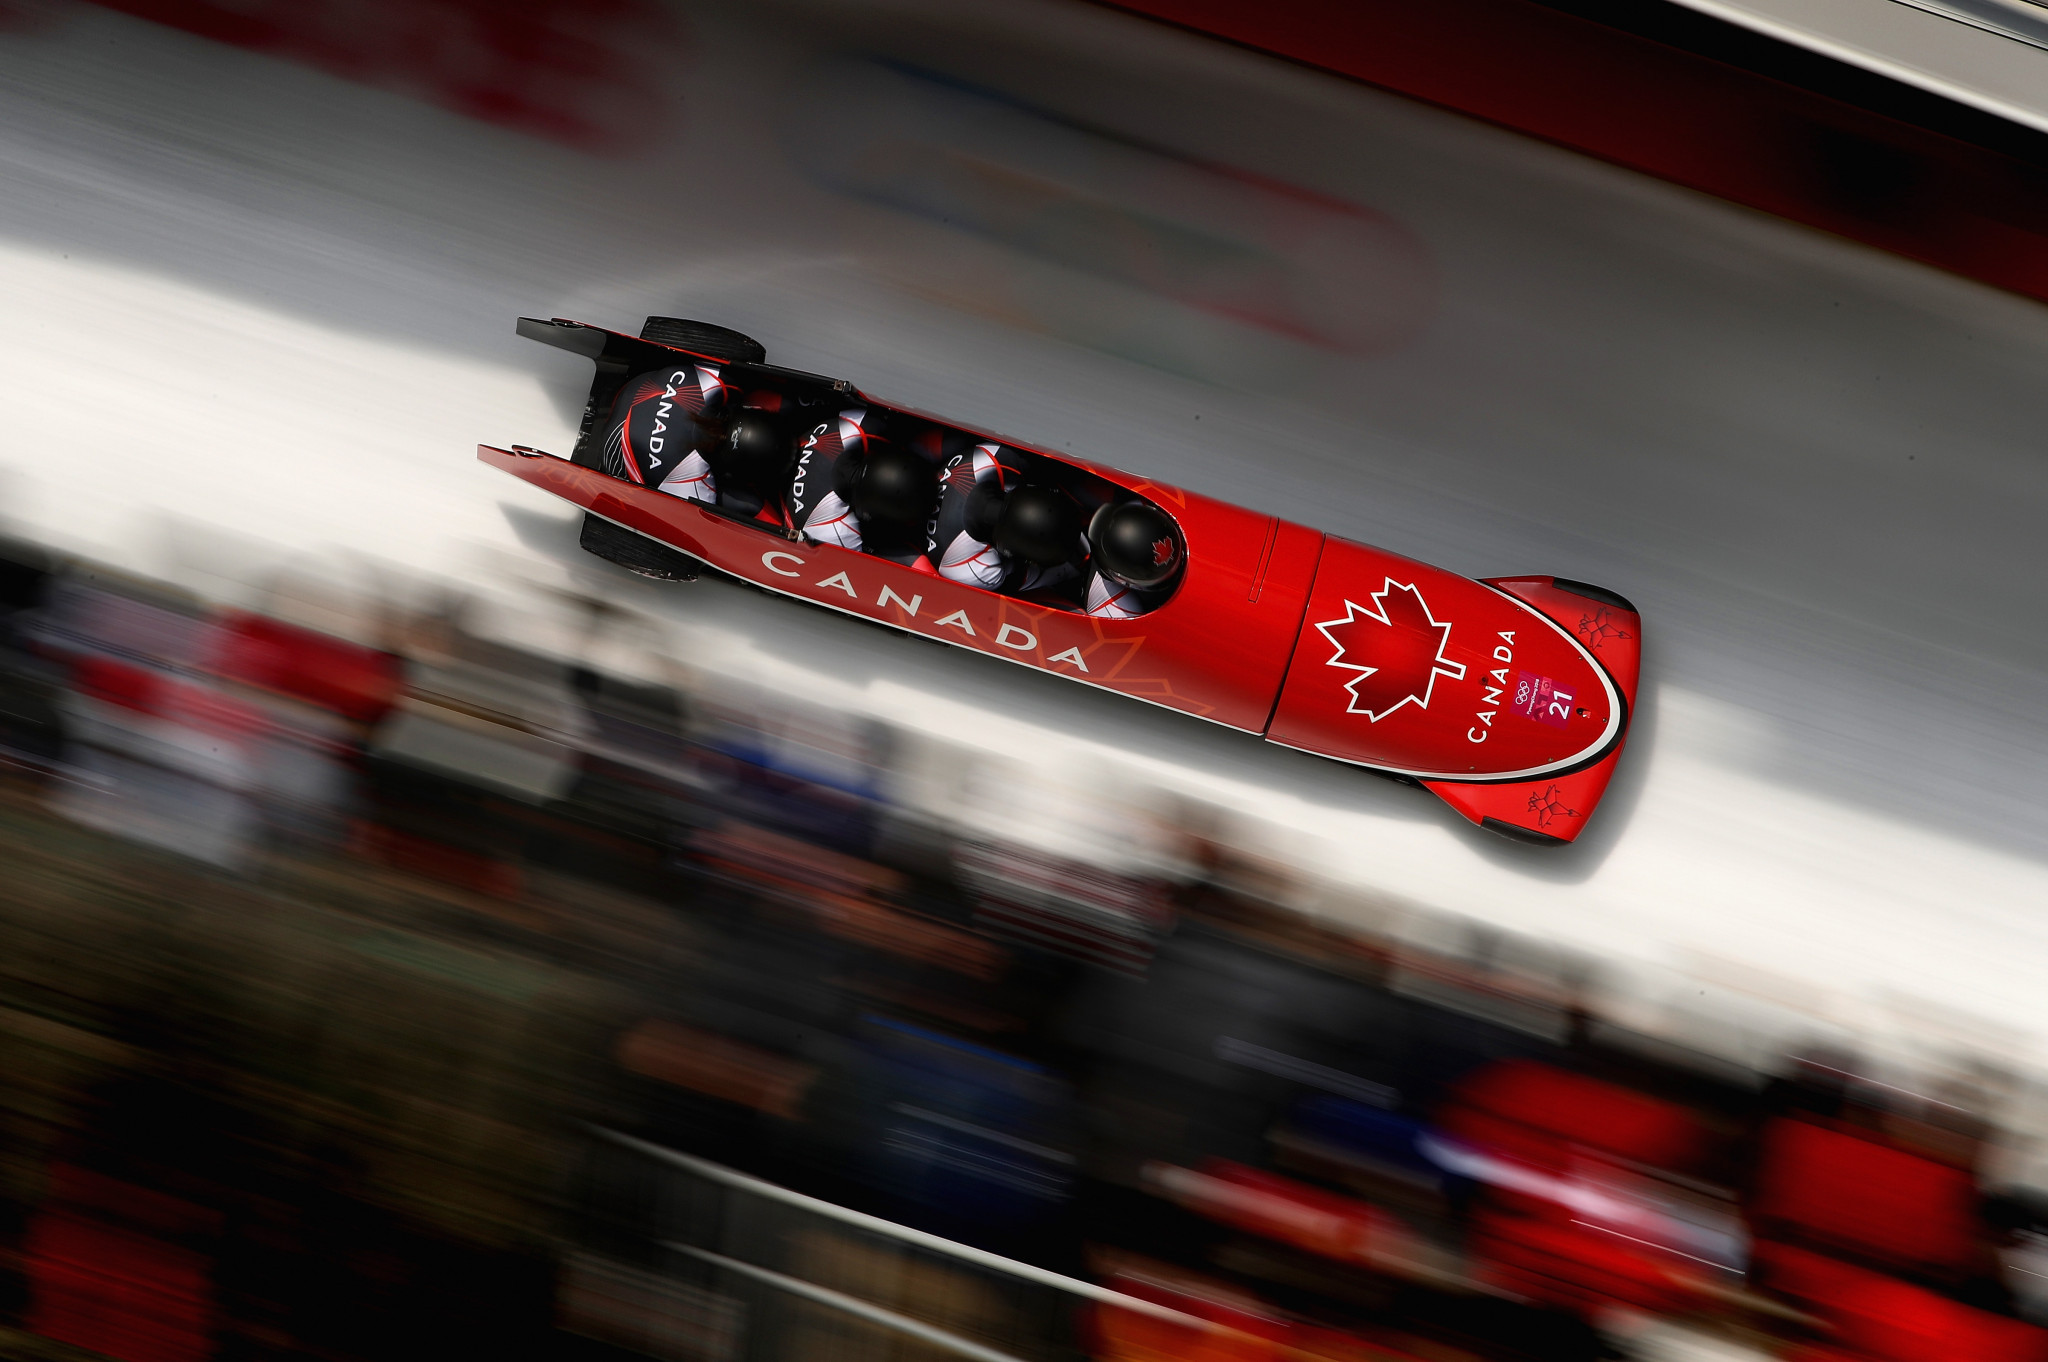 Bobsleigh Canada Skeleton has strong traditions for grabbing Olympic and World Championship podiums ©Getty Images